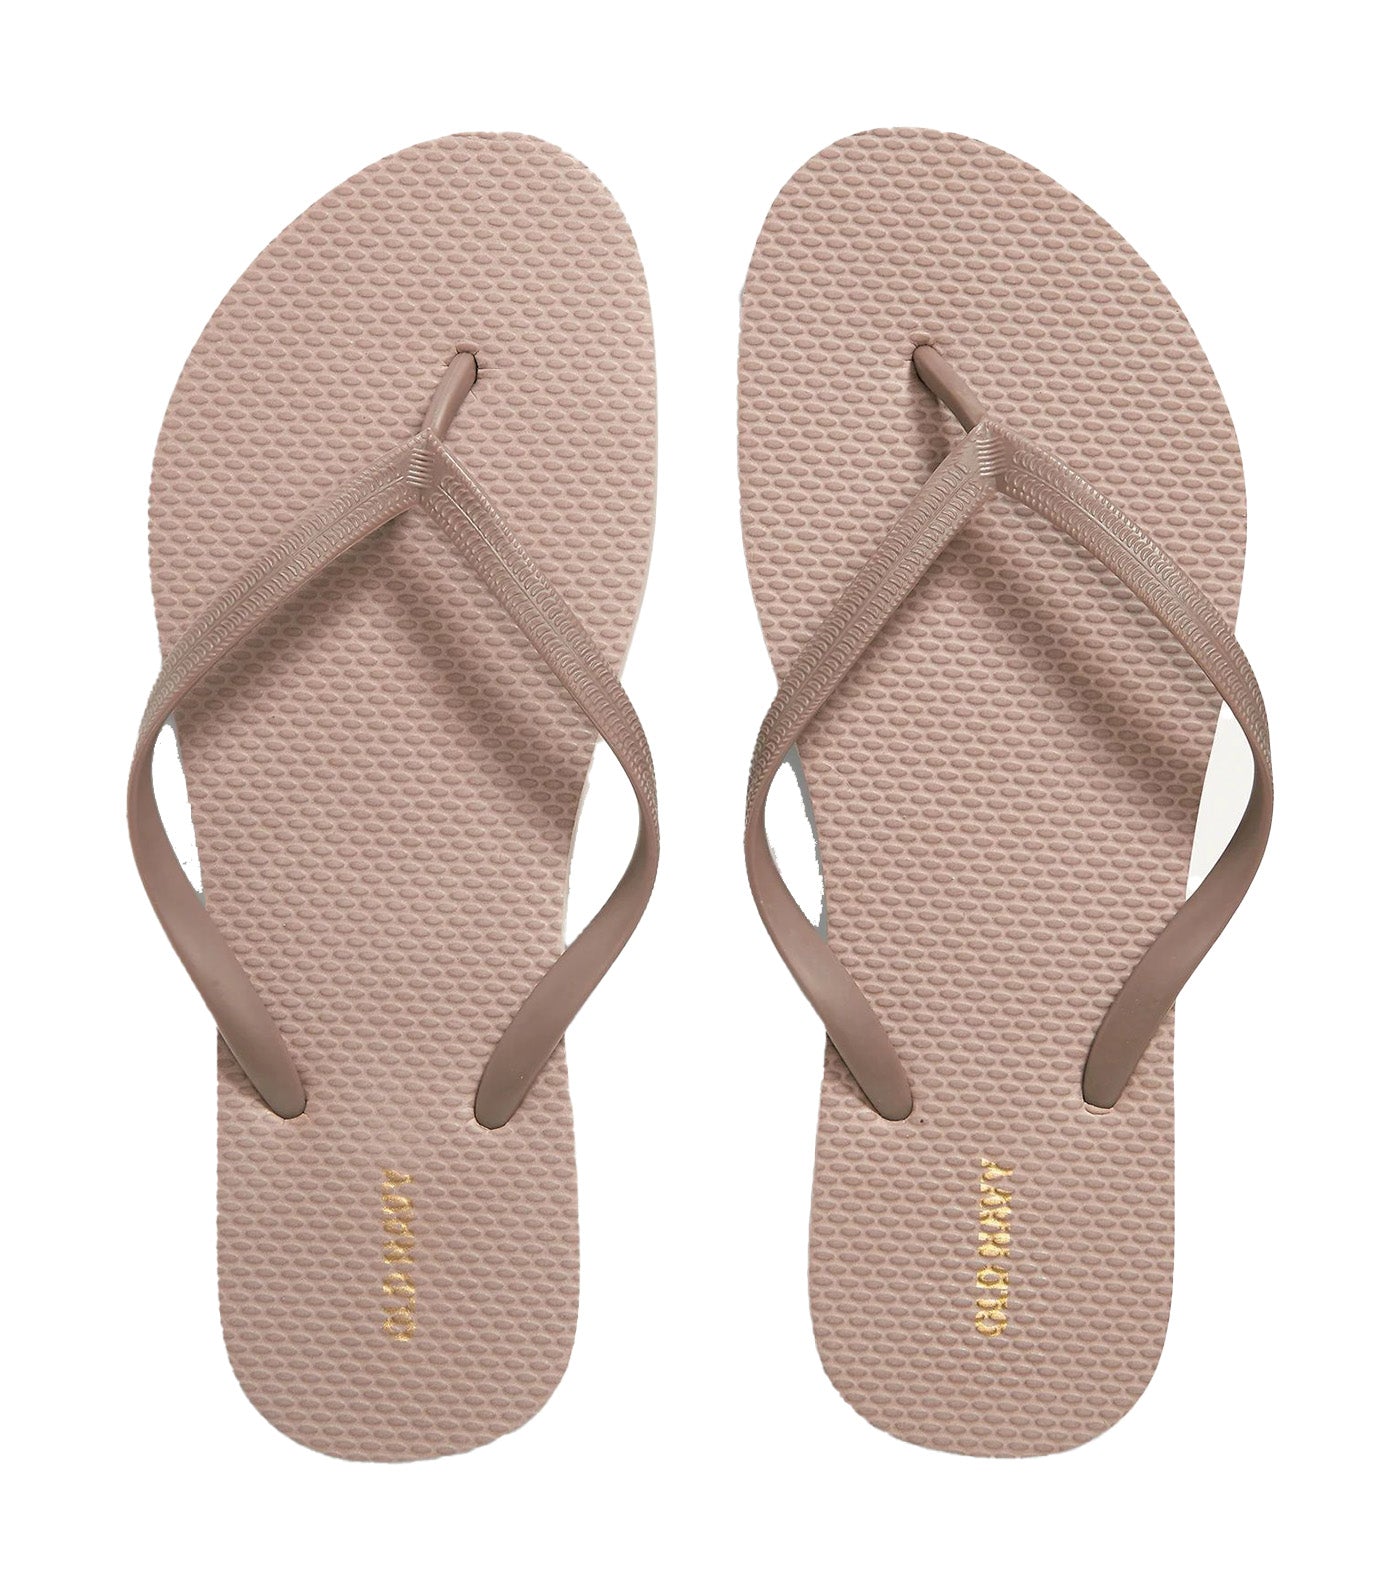 Flip-Flop Sandals for Women (Partially Plant-Based) Taupe